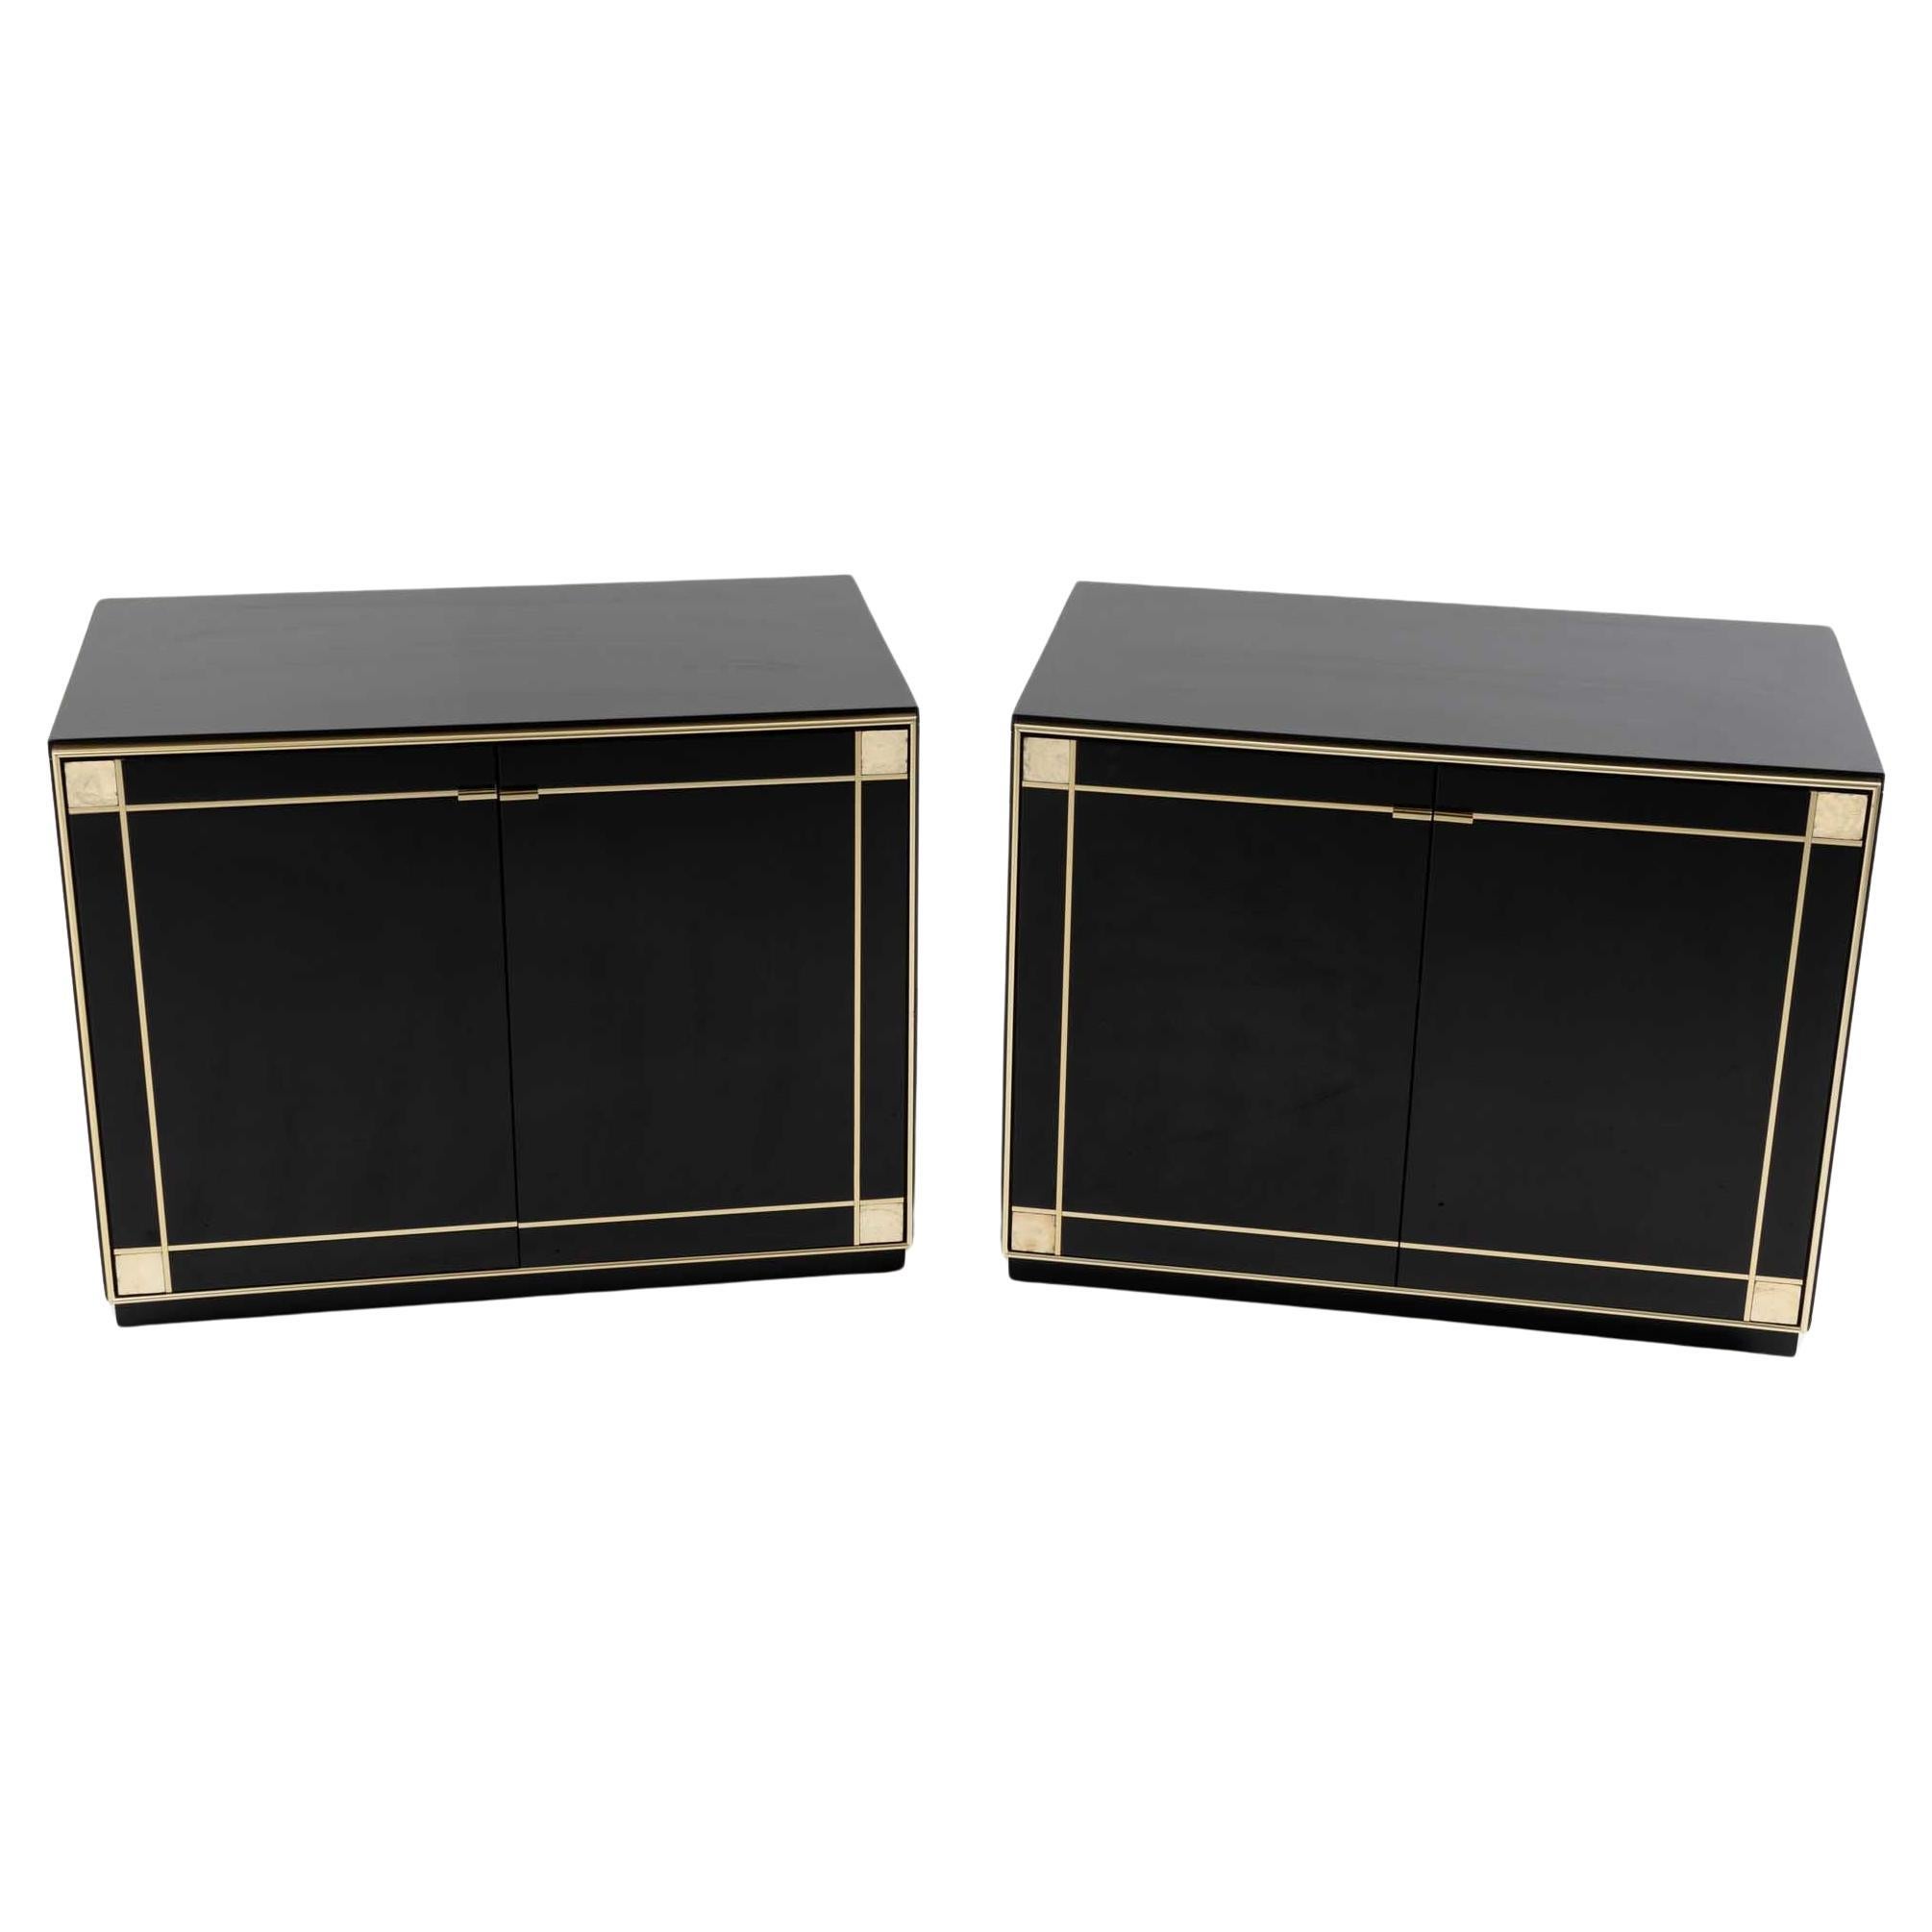 Black lacquered sideboards by Pierre Cardin, France 1980s For Sale